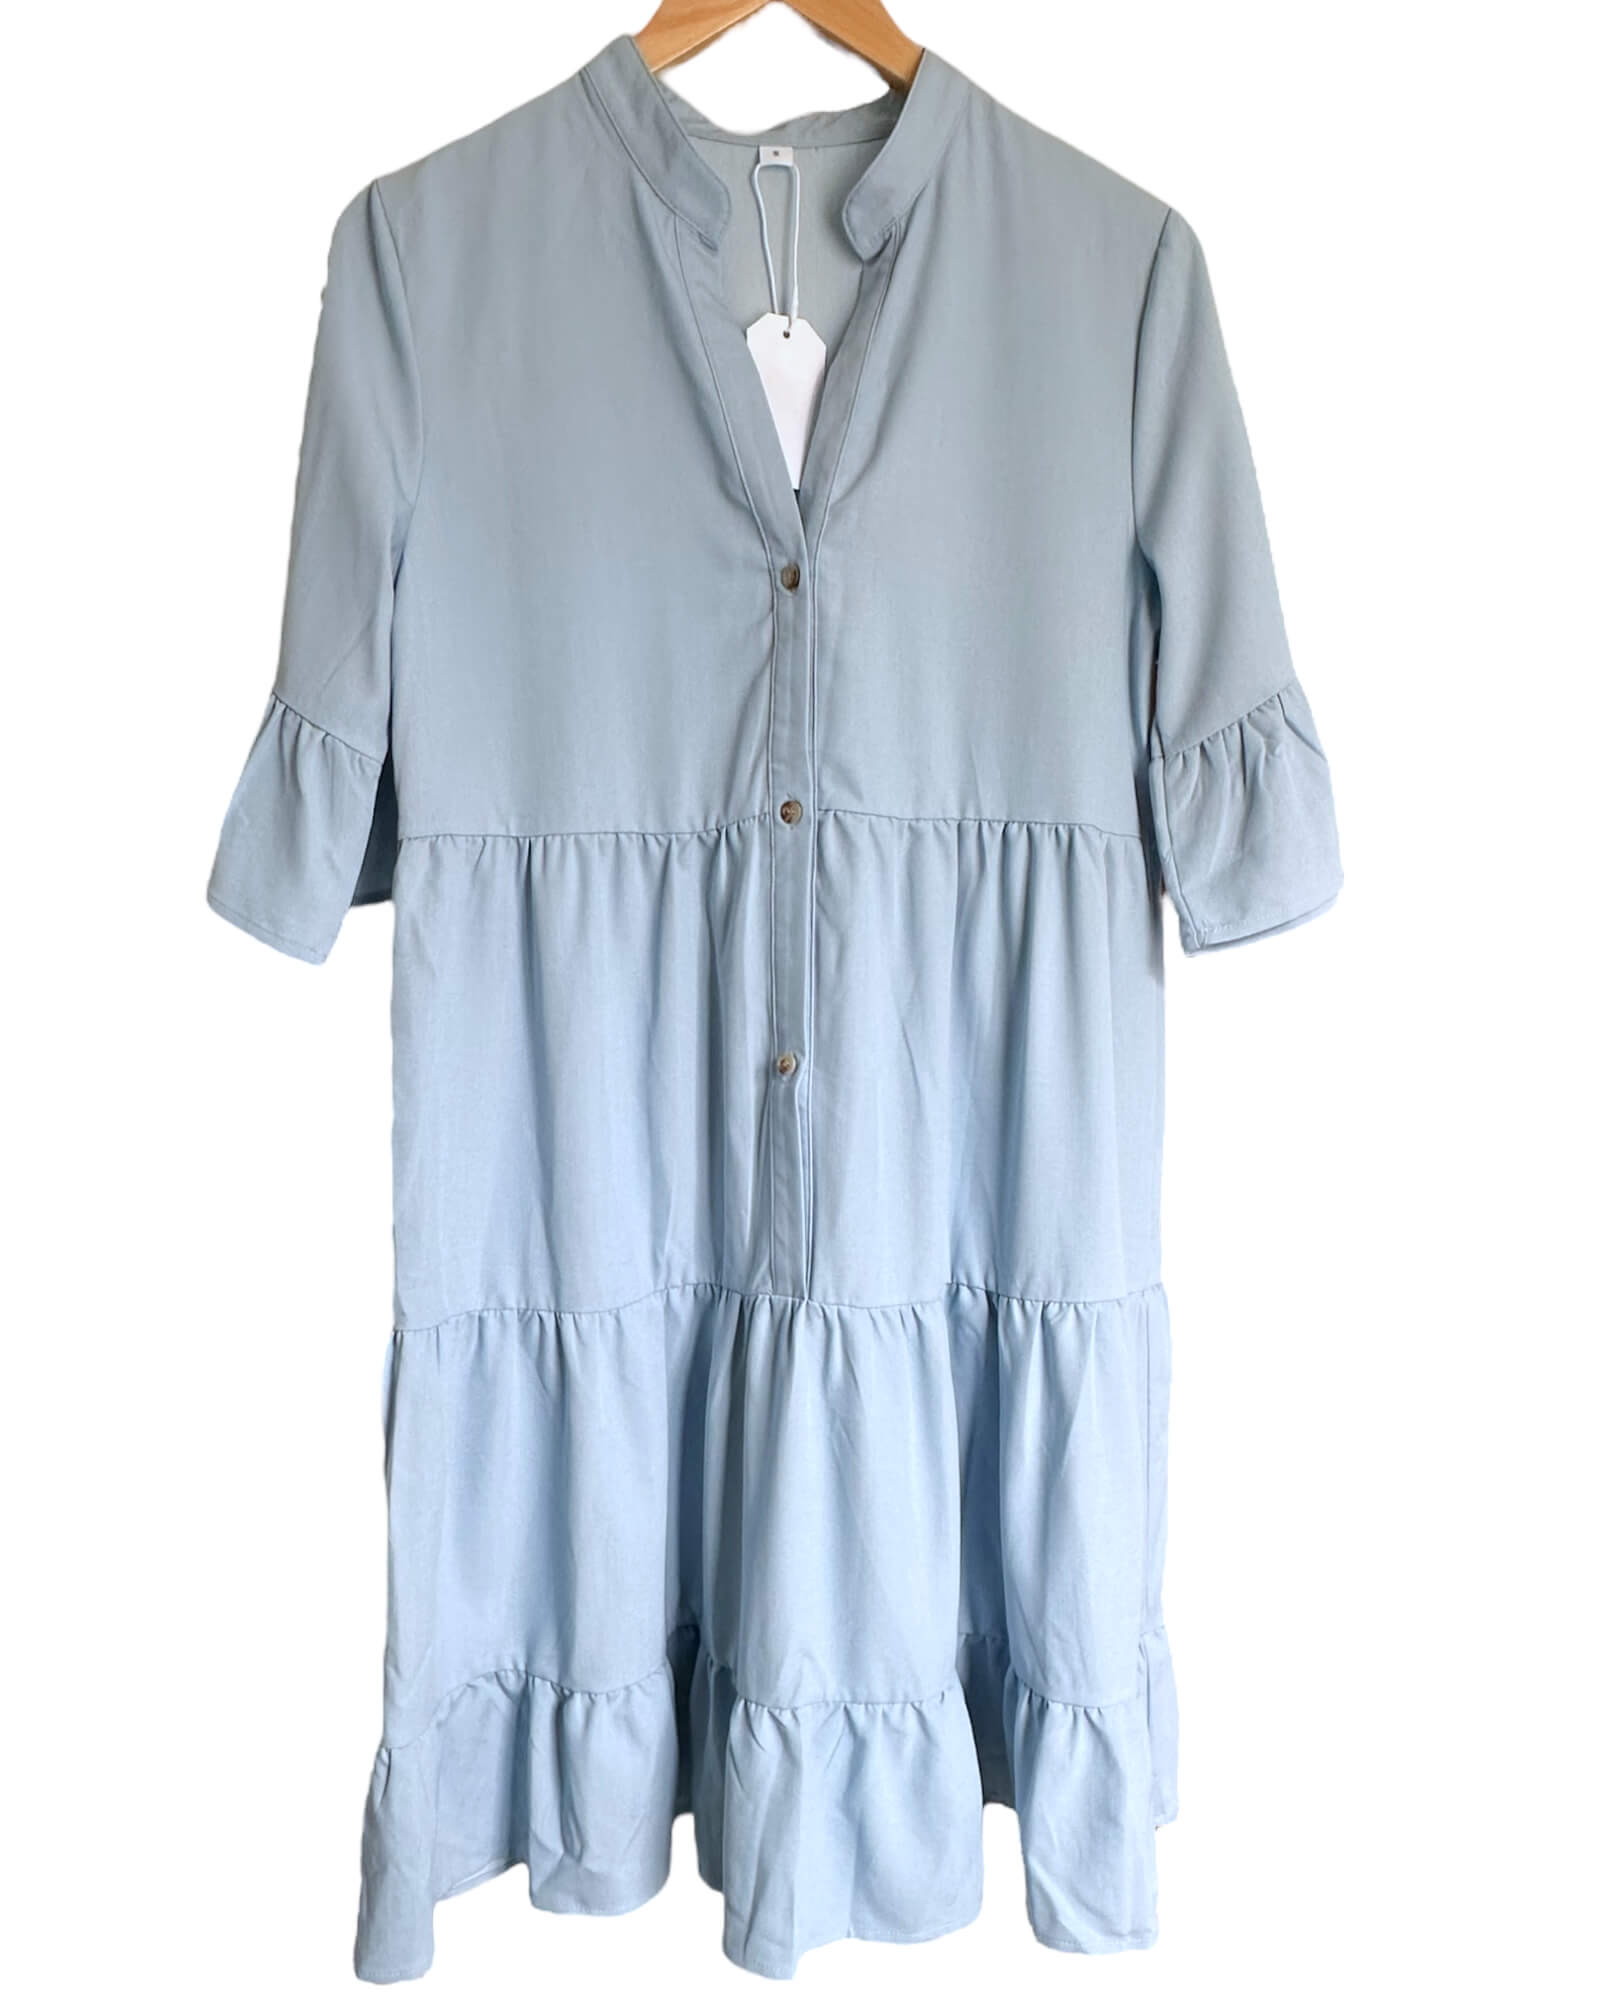 Cool Summer MADE WITH LOVE tiered babydoll shirt dress